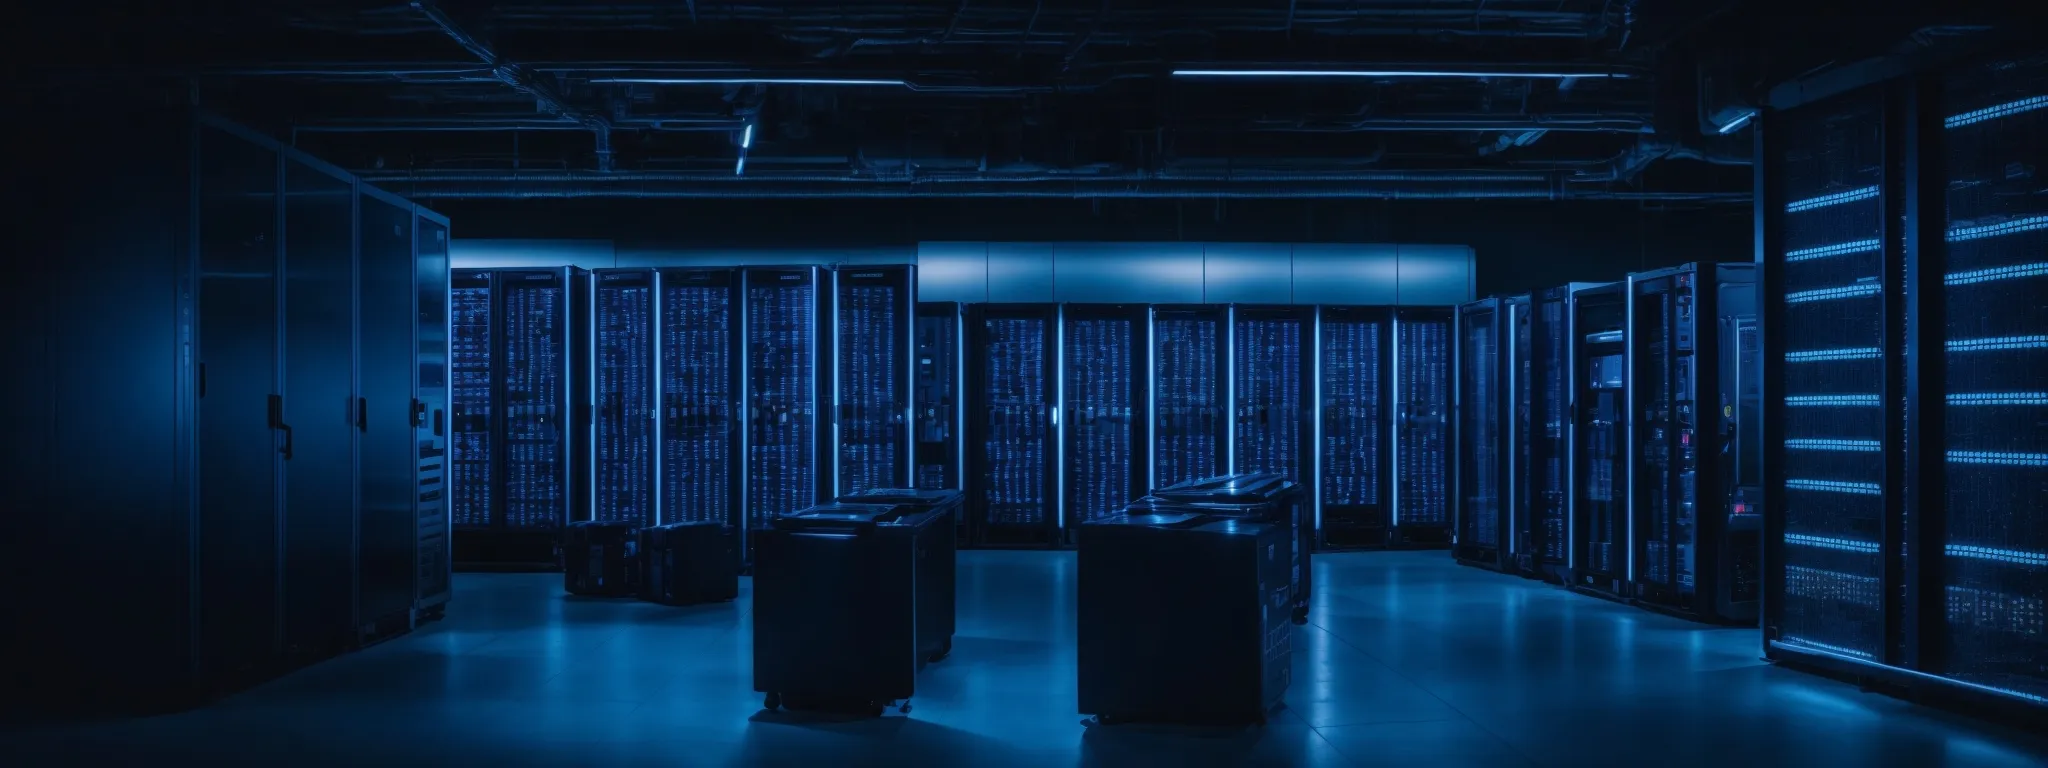 a secure server room with rows of modern computers and blue led lights indicating active data protection.